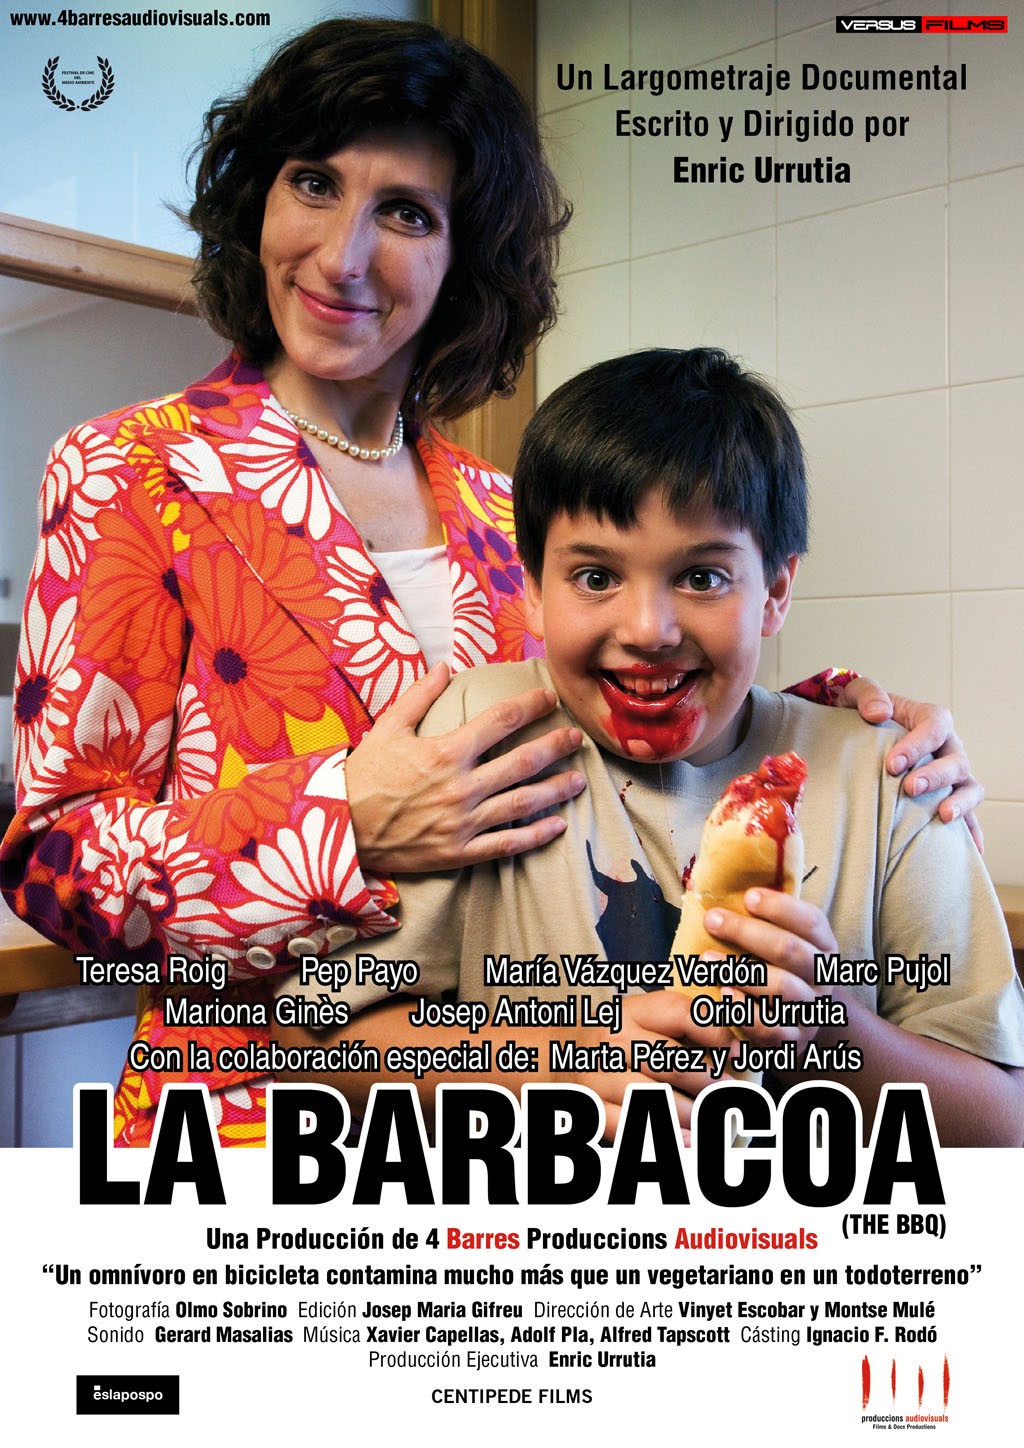 Extra Large Movie Poster Image for La barbacoa 